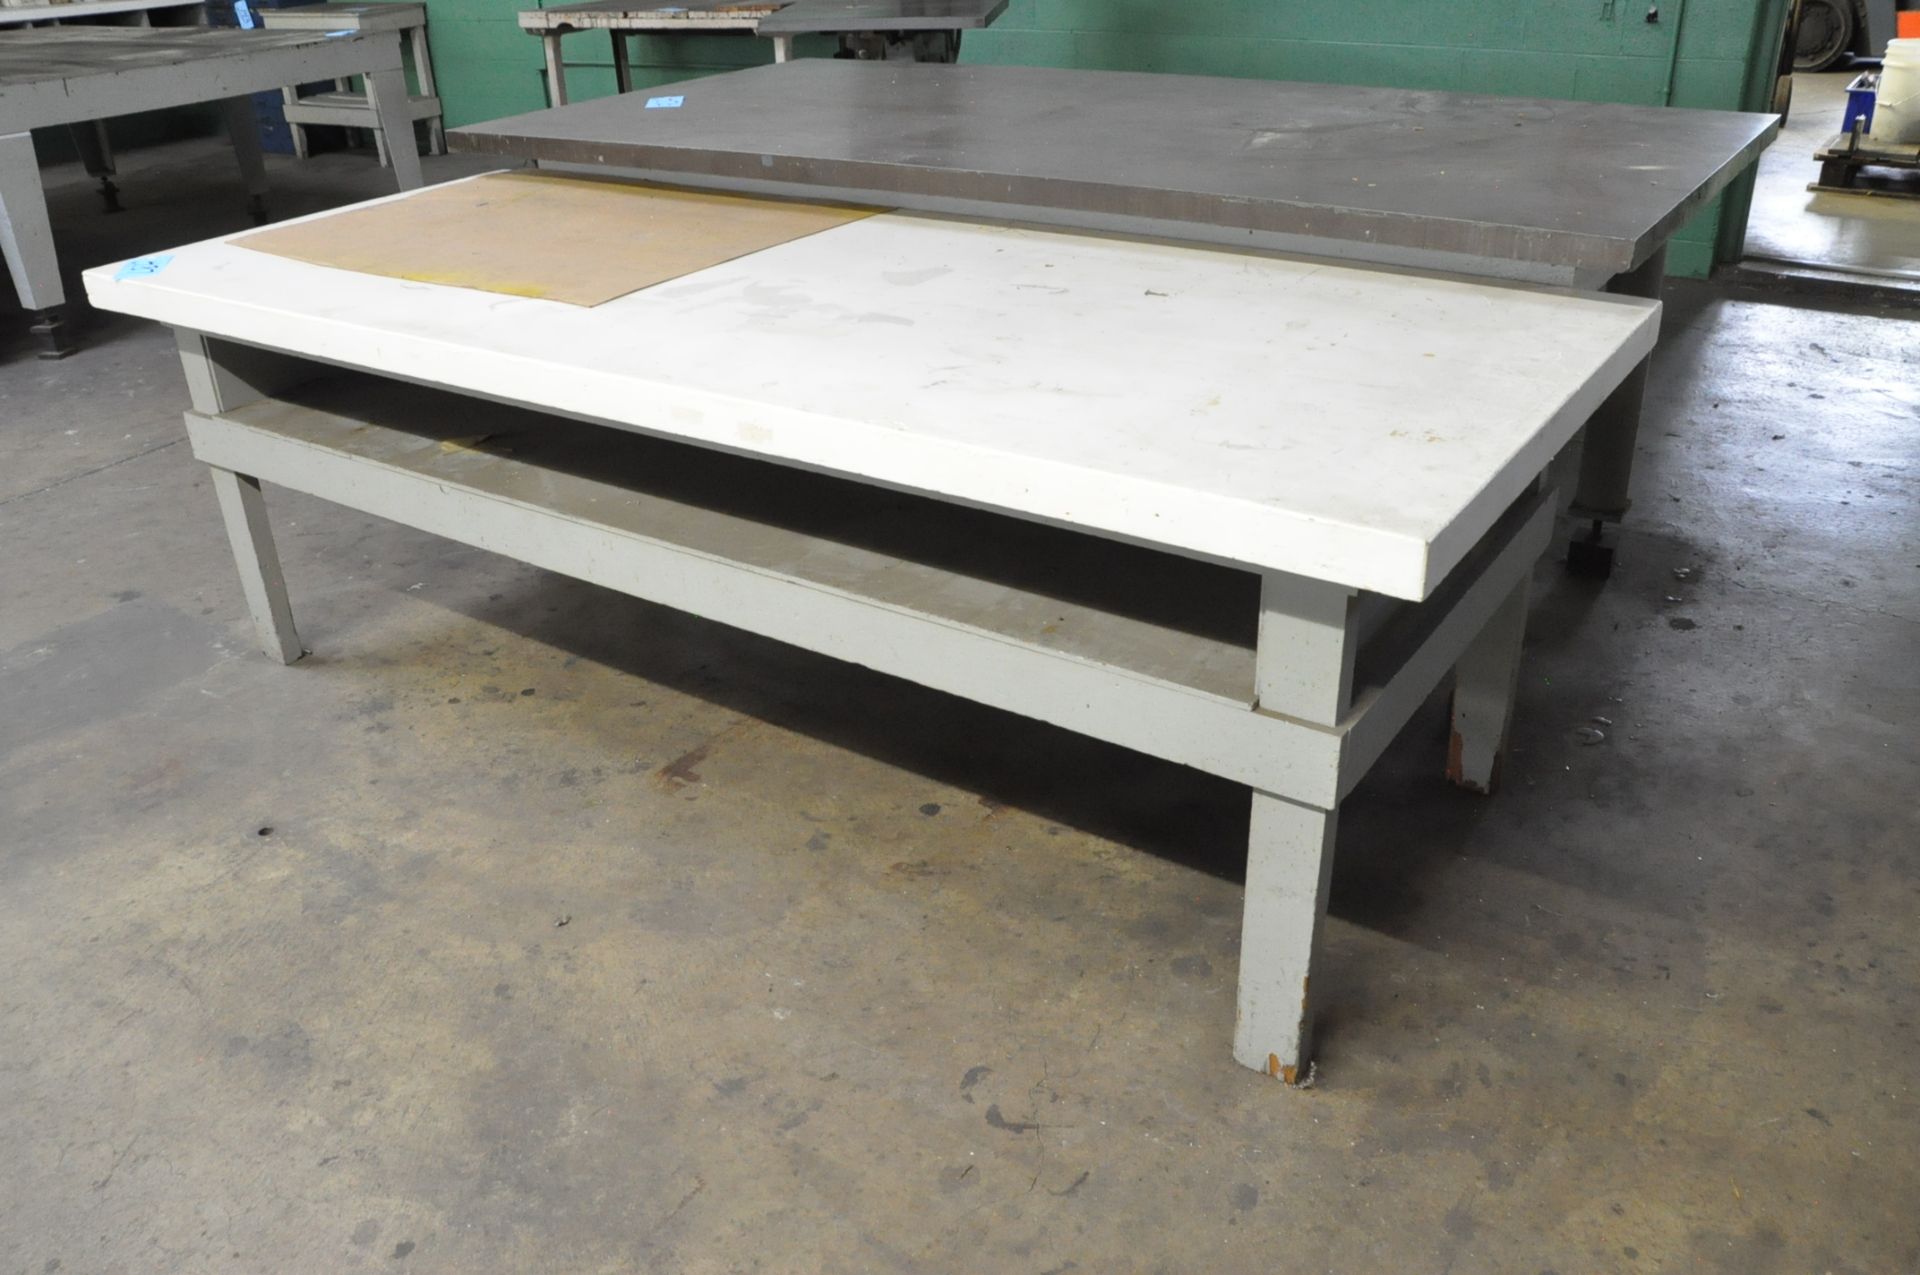 Lot of 3: (2) 39 1/2" x 97 1/2", and (1) 49 1/2" x 97 1/2" Heavy Duty Wood Layout Tables - Image 2 of 3